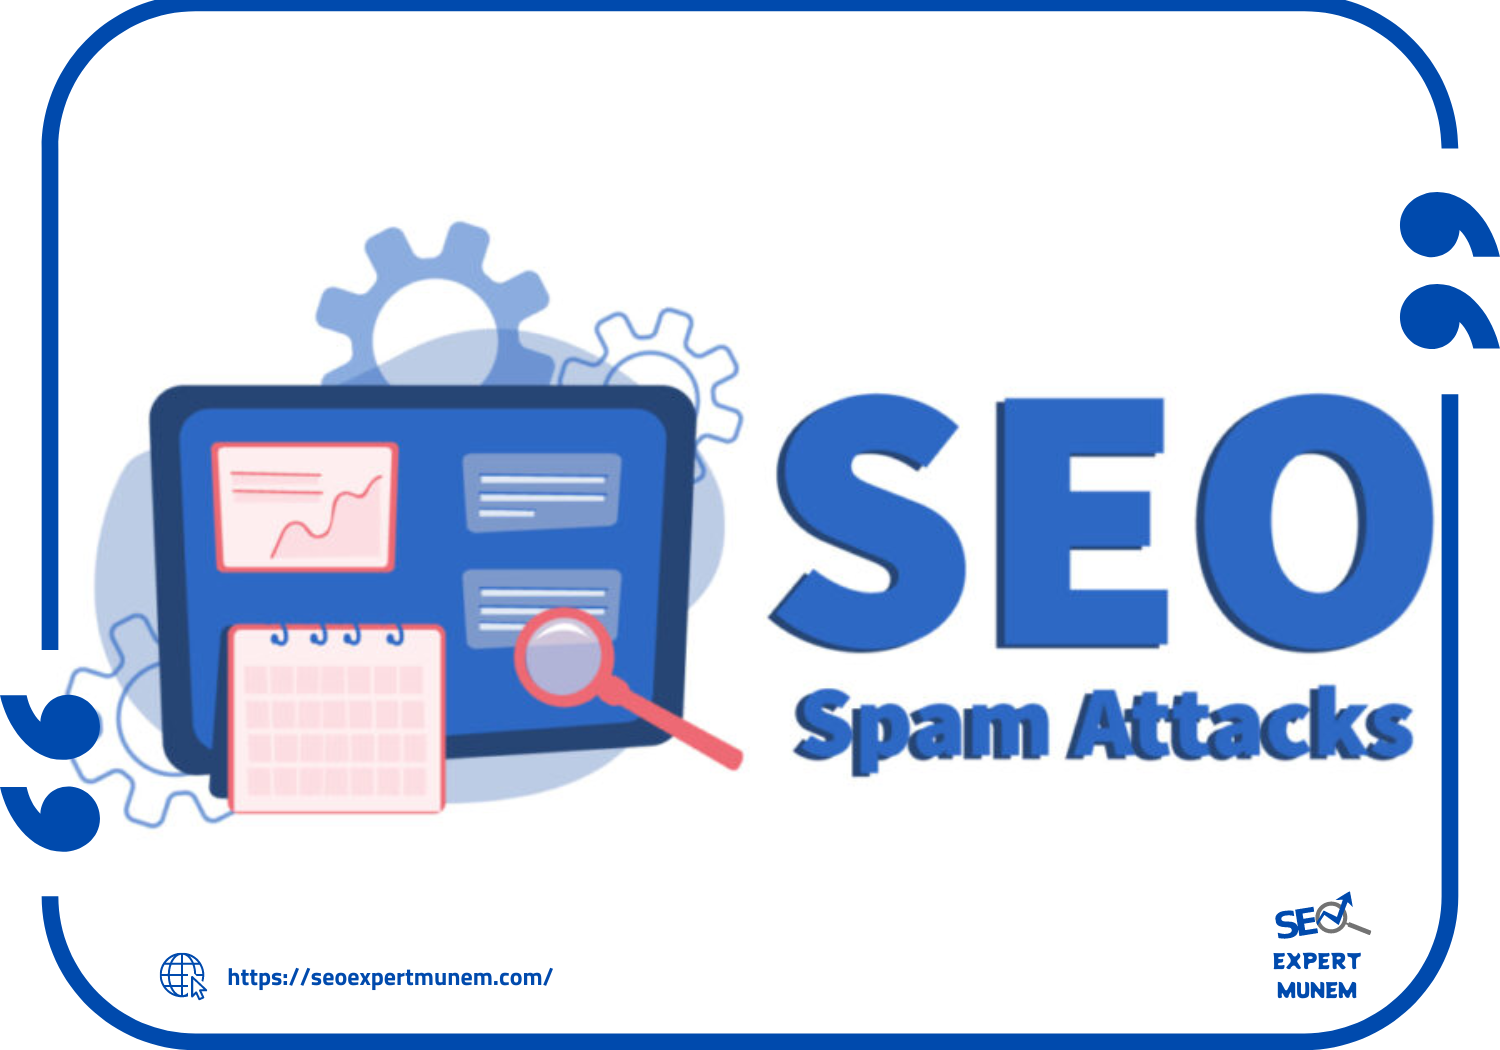 What exactly is SEO Spam?